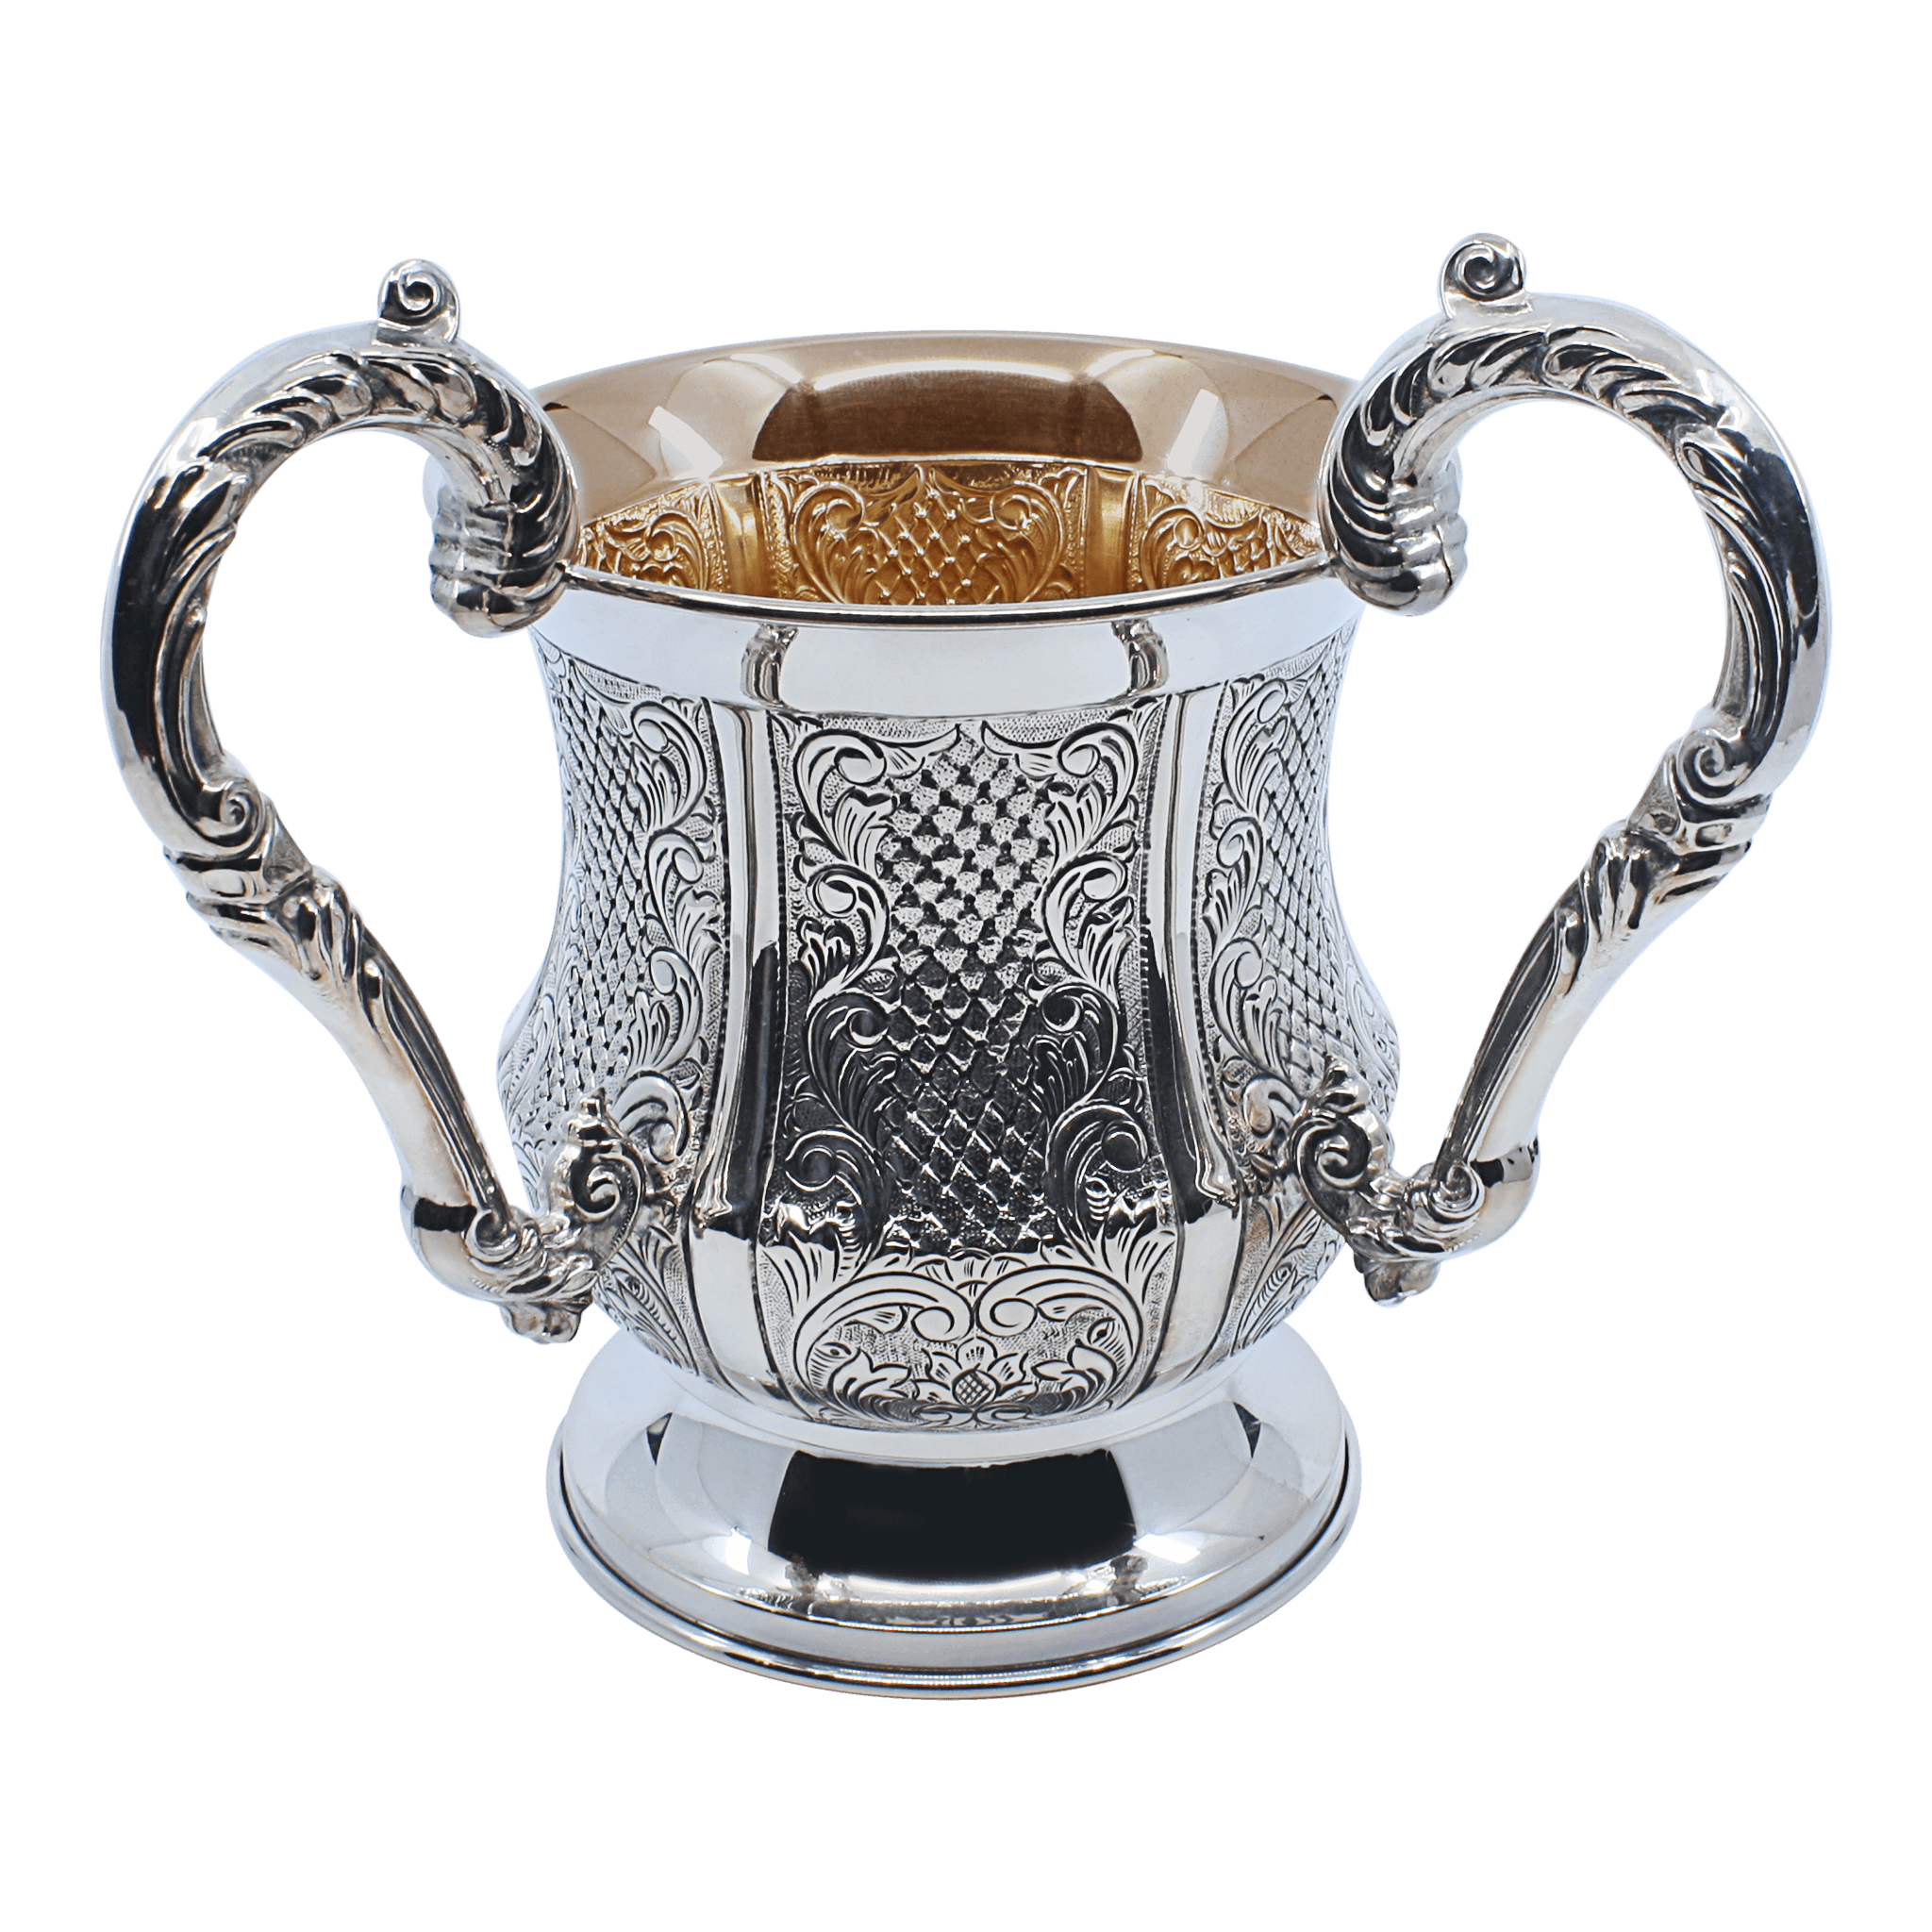 Sterling Silver Wash Cup 6910 at $1560.00 - Piece By Zion Hadad